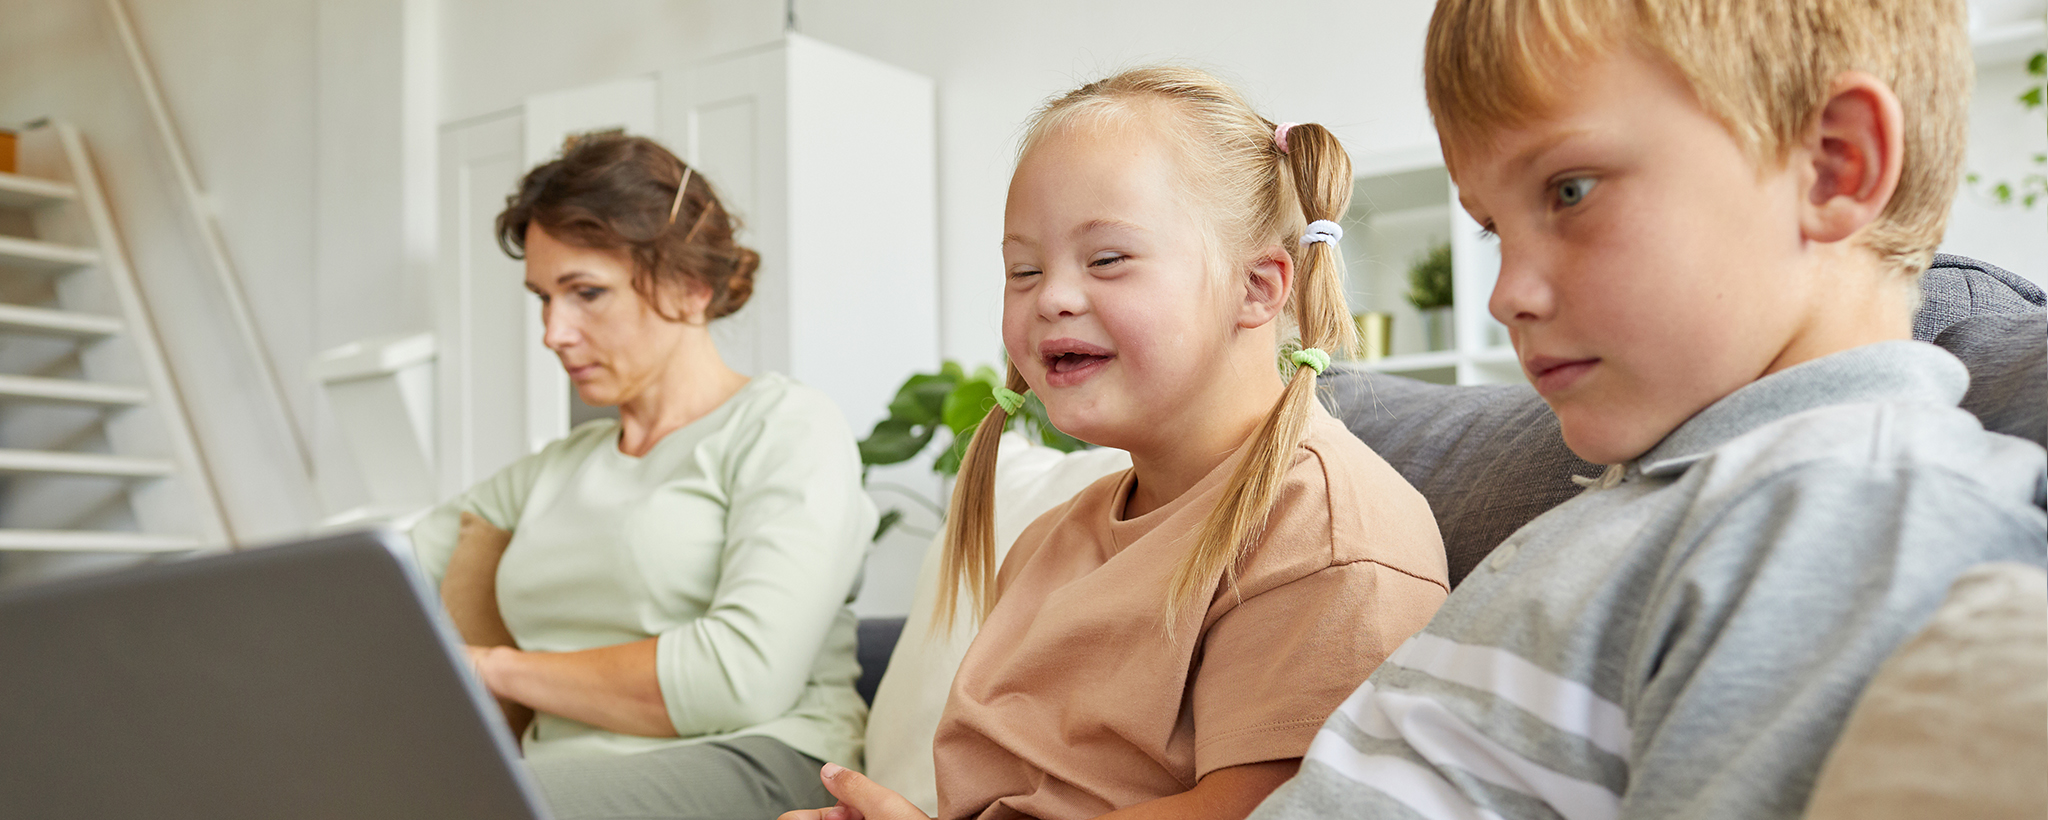 A girl with down syndrome sits on the couch with her mother and brother.